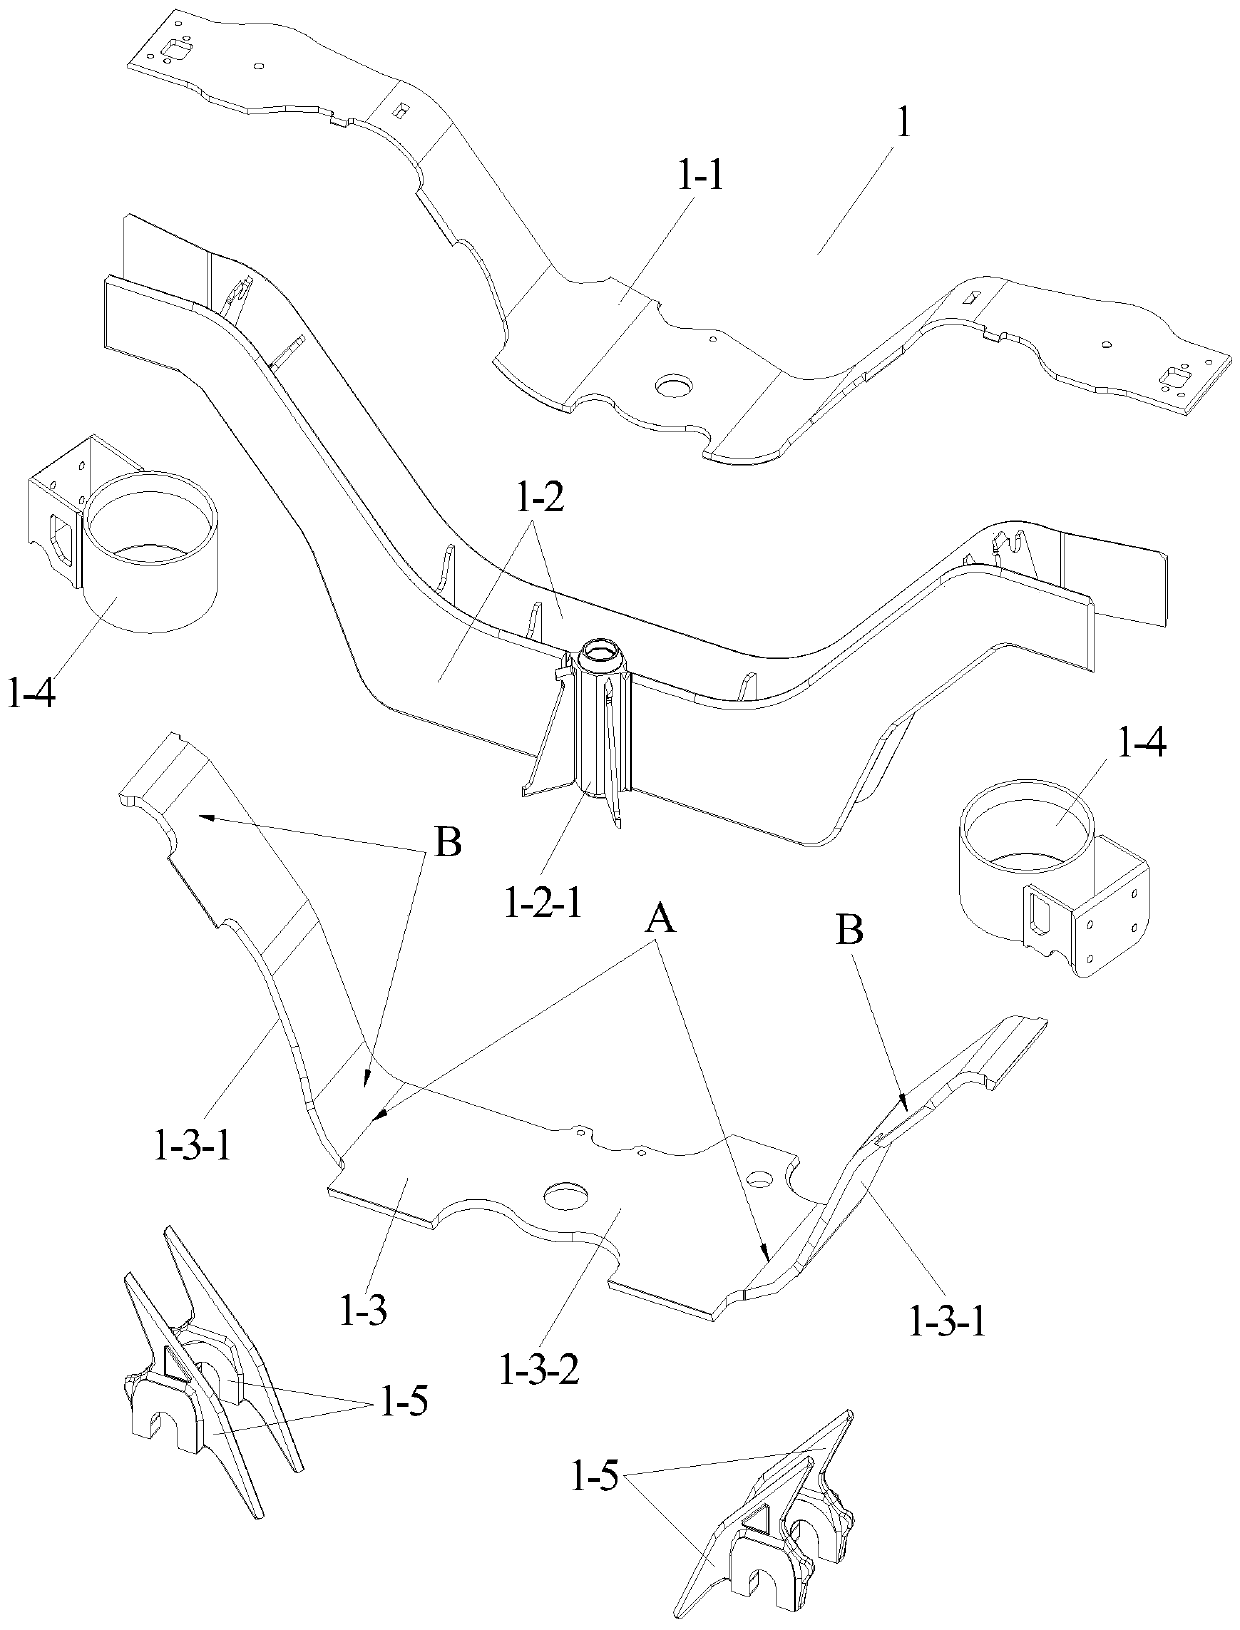 Anti-installation attitude assembly positioning tool for side beam welding